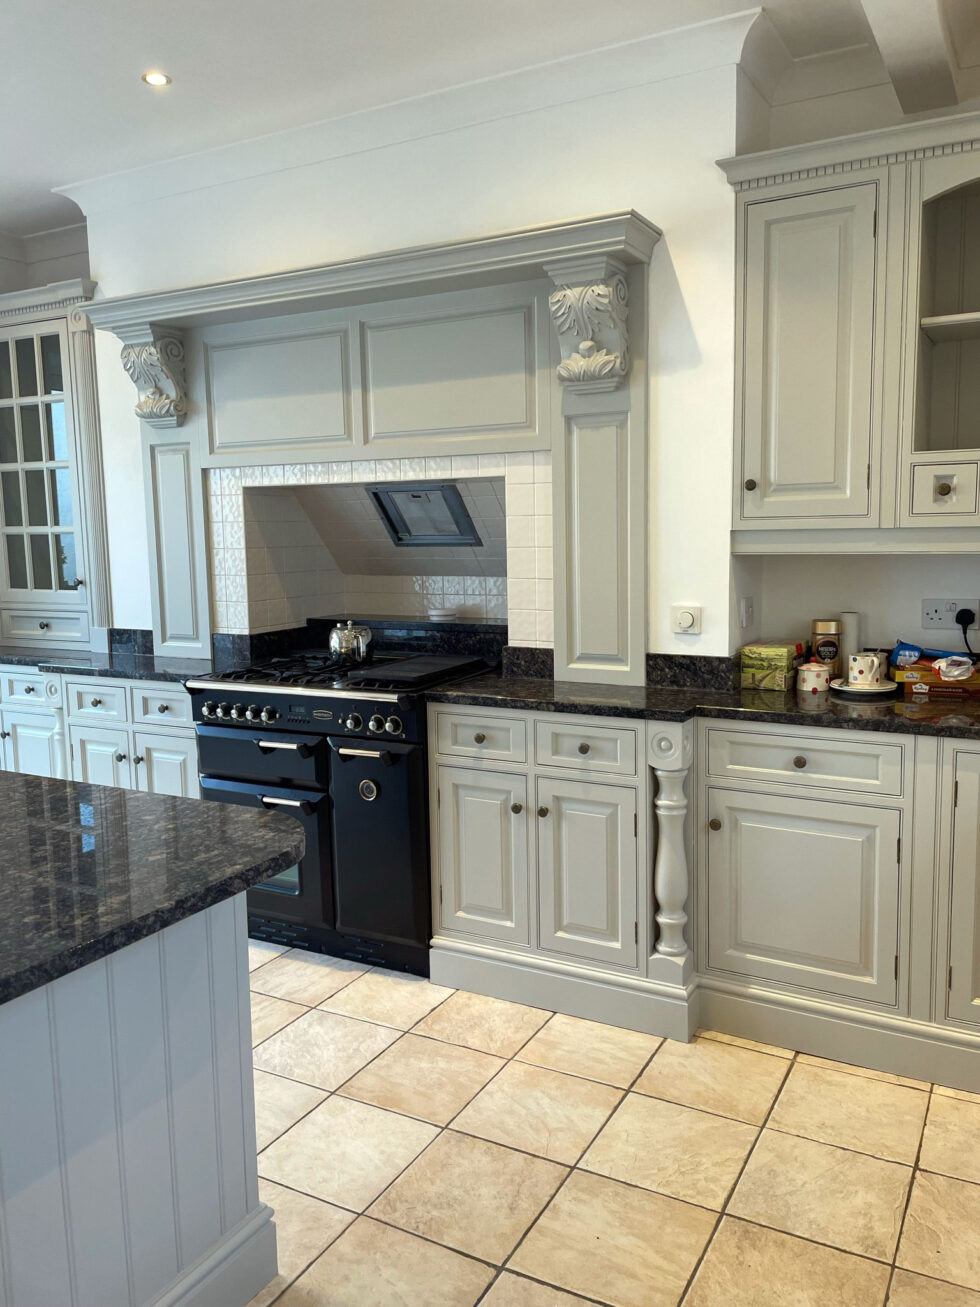 View of handpainted kitchen in grey